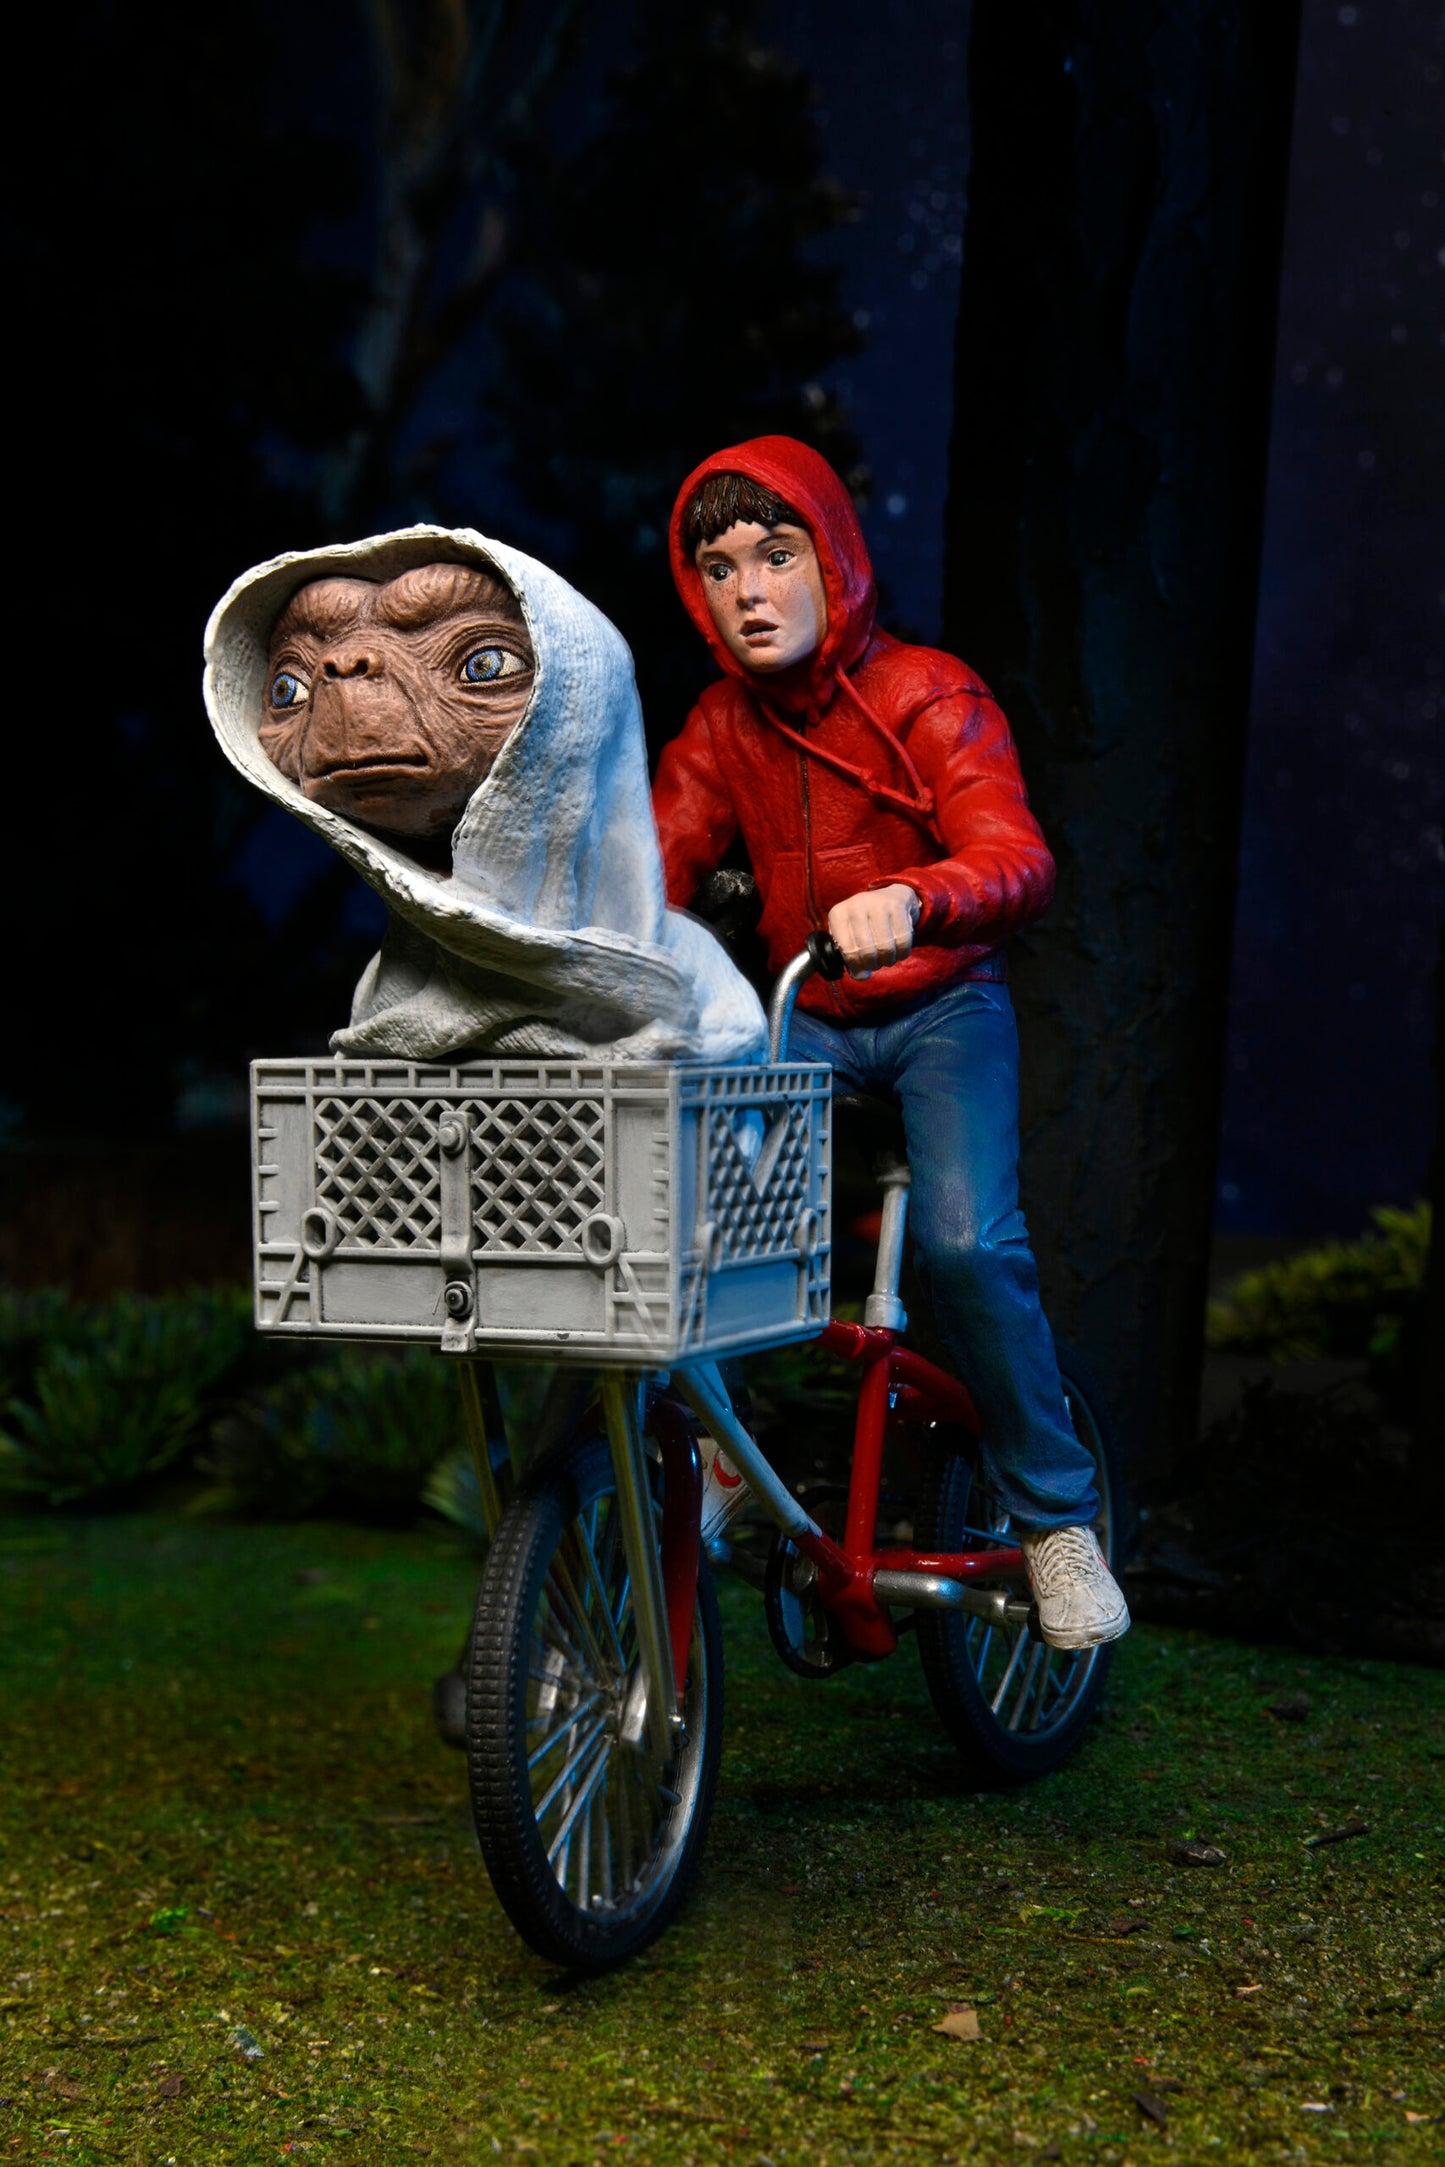 E.T. The Extra-Terrestrial 40th Anniversary

7″ Scale Action Figure – Elliott & E.T. on Bicycle